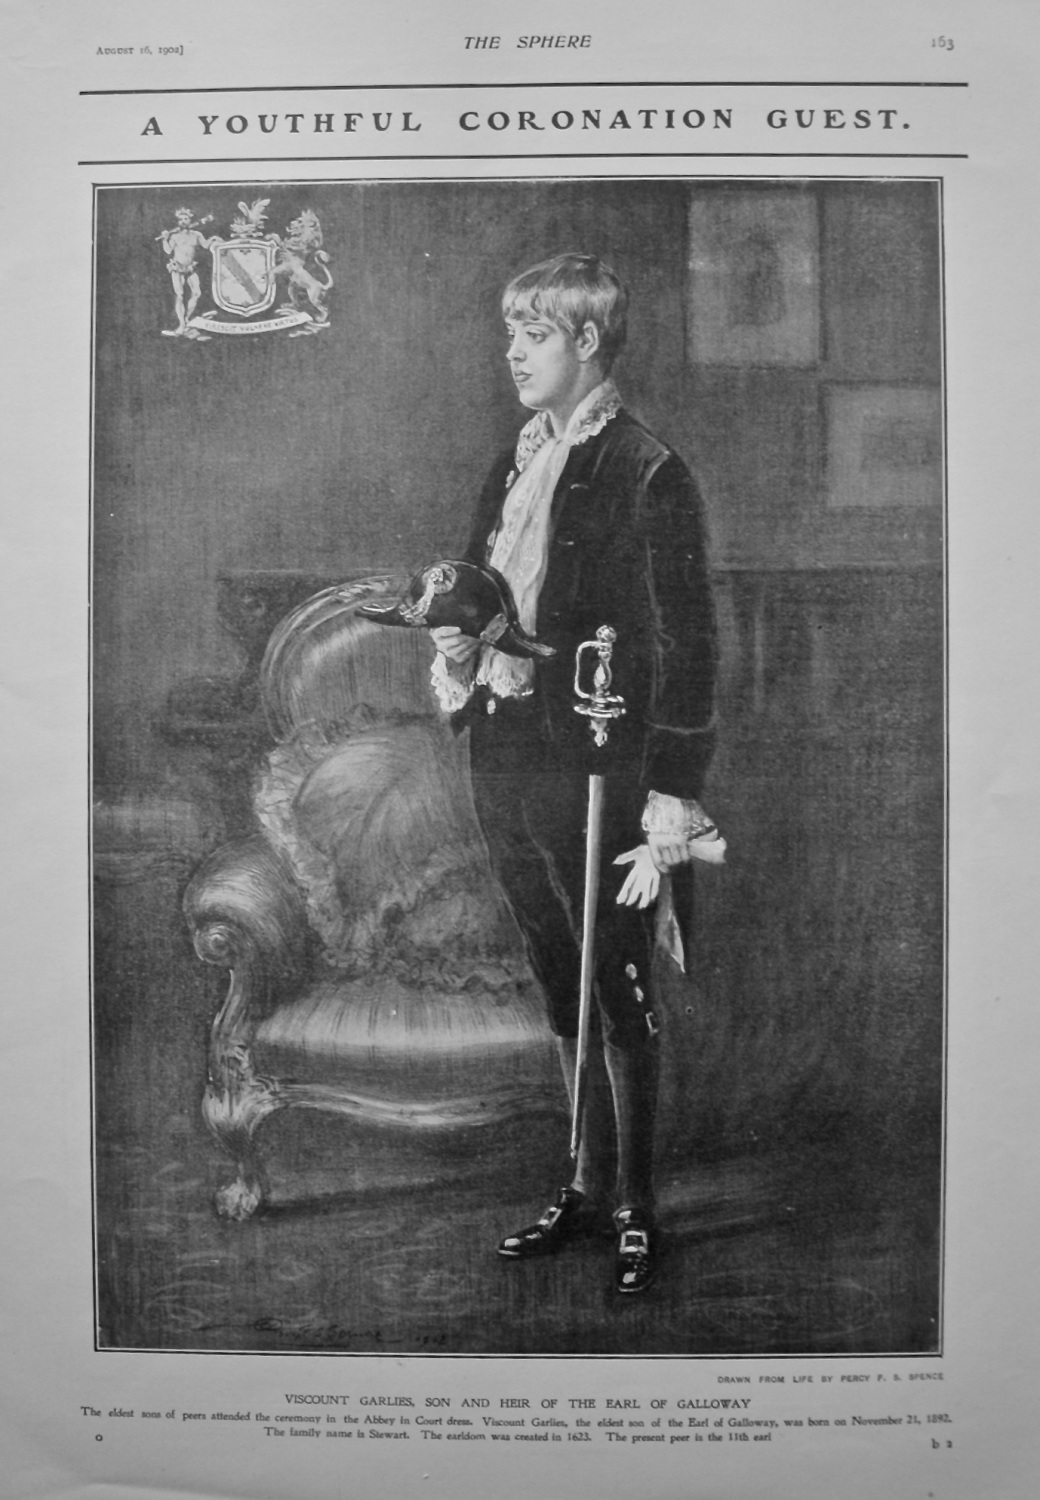 A Youthful Coronation Guest : Viscount Garlies, Son and Heir of the Earl of